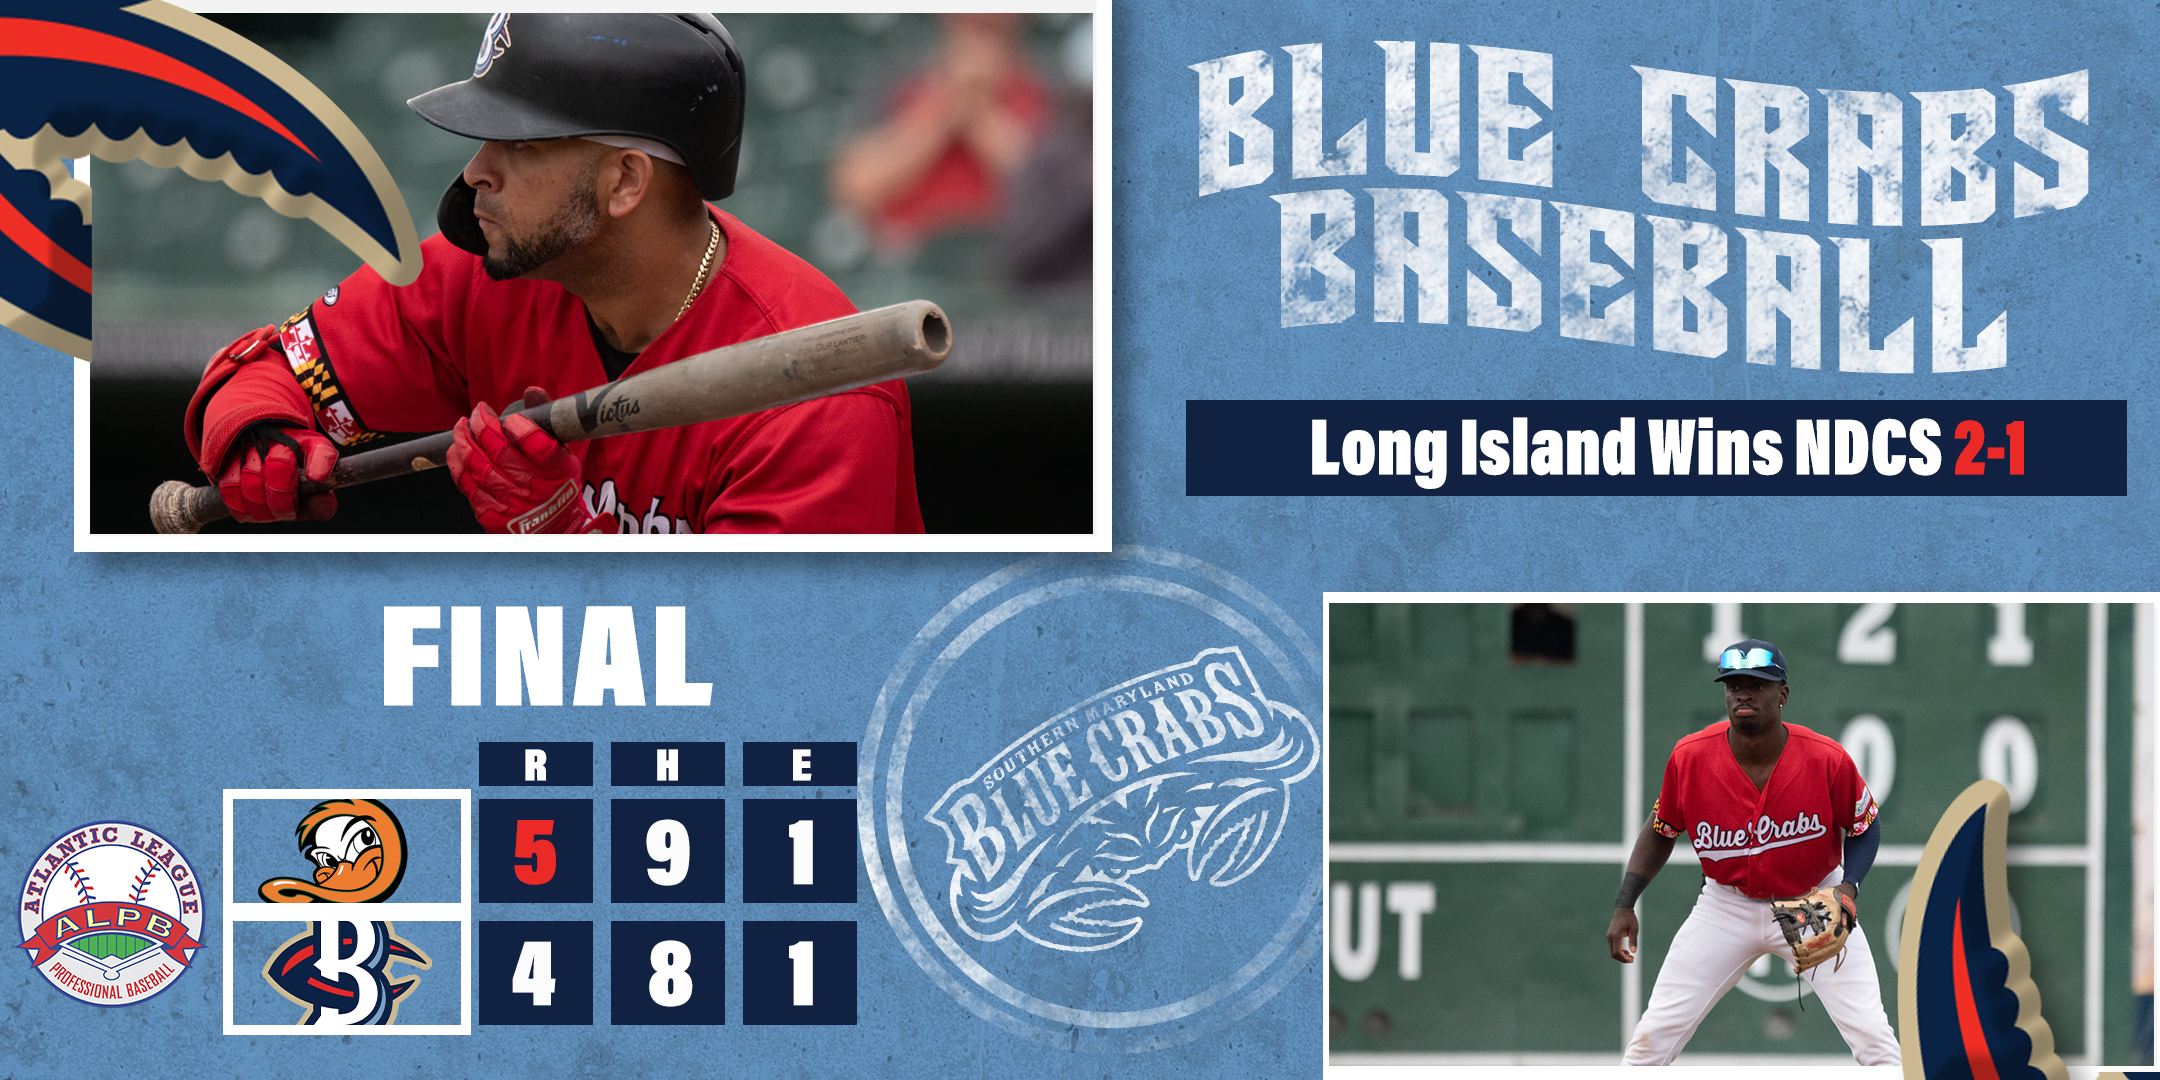 Crabs Knocked Out of Playoffs in Heartbreaking Loss